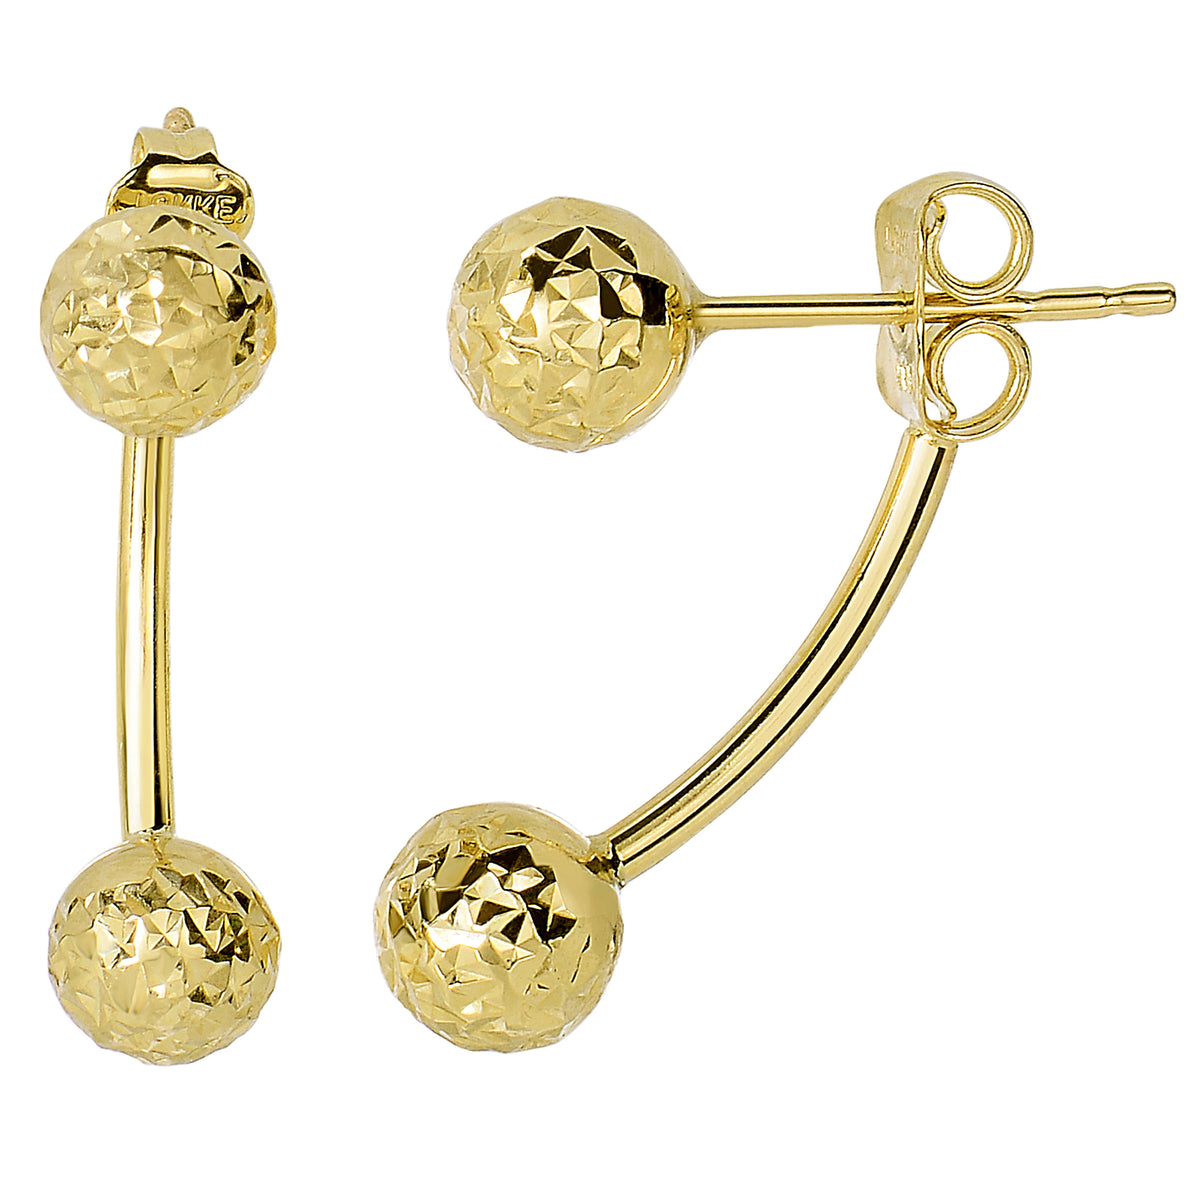 14k Yellow Hammered Finish Gold Front And Back Double Ball Belly Ring Style Earrings, 6mm